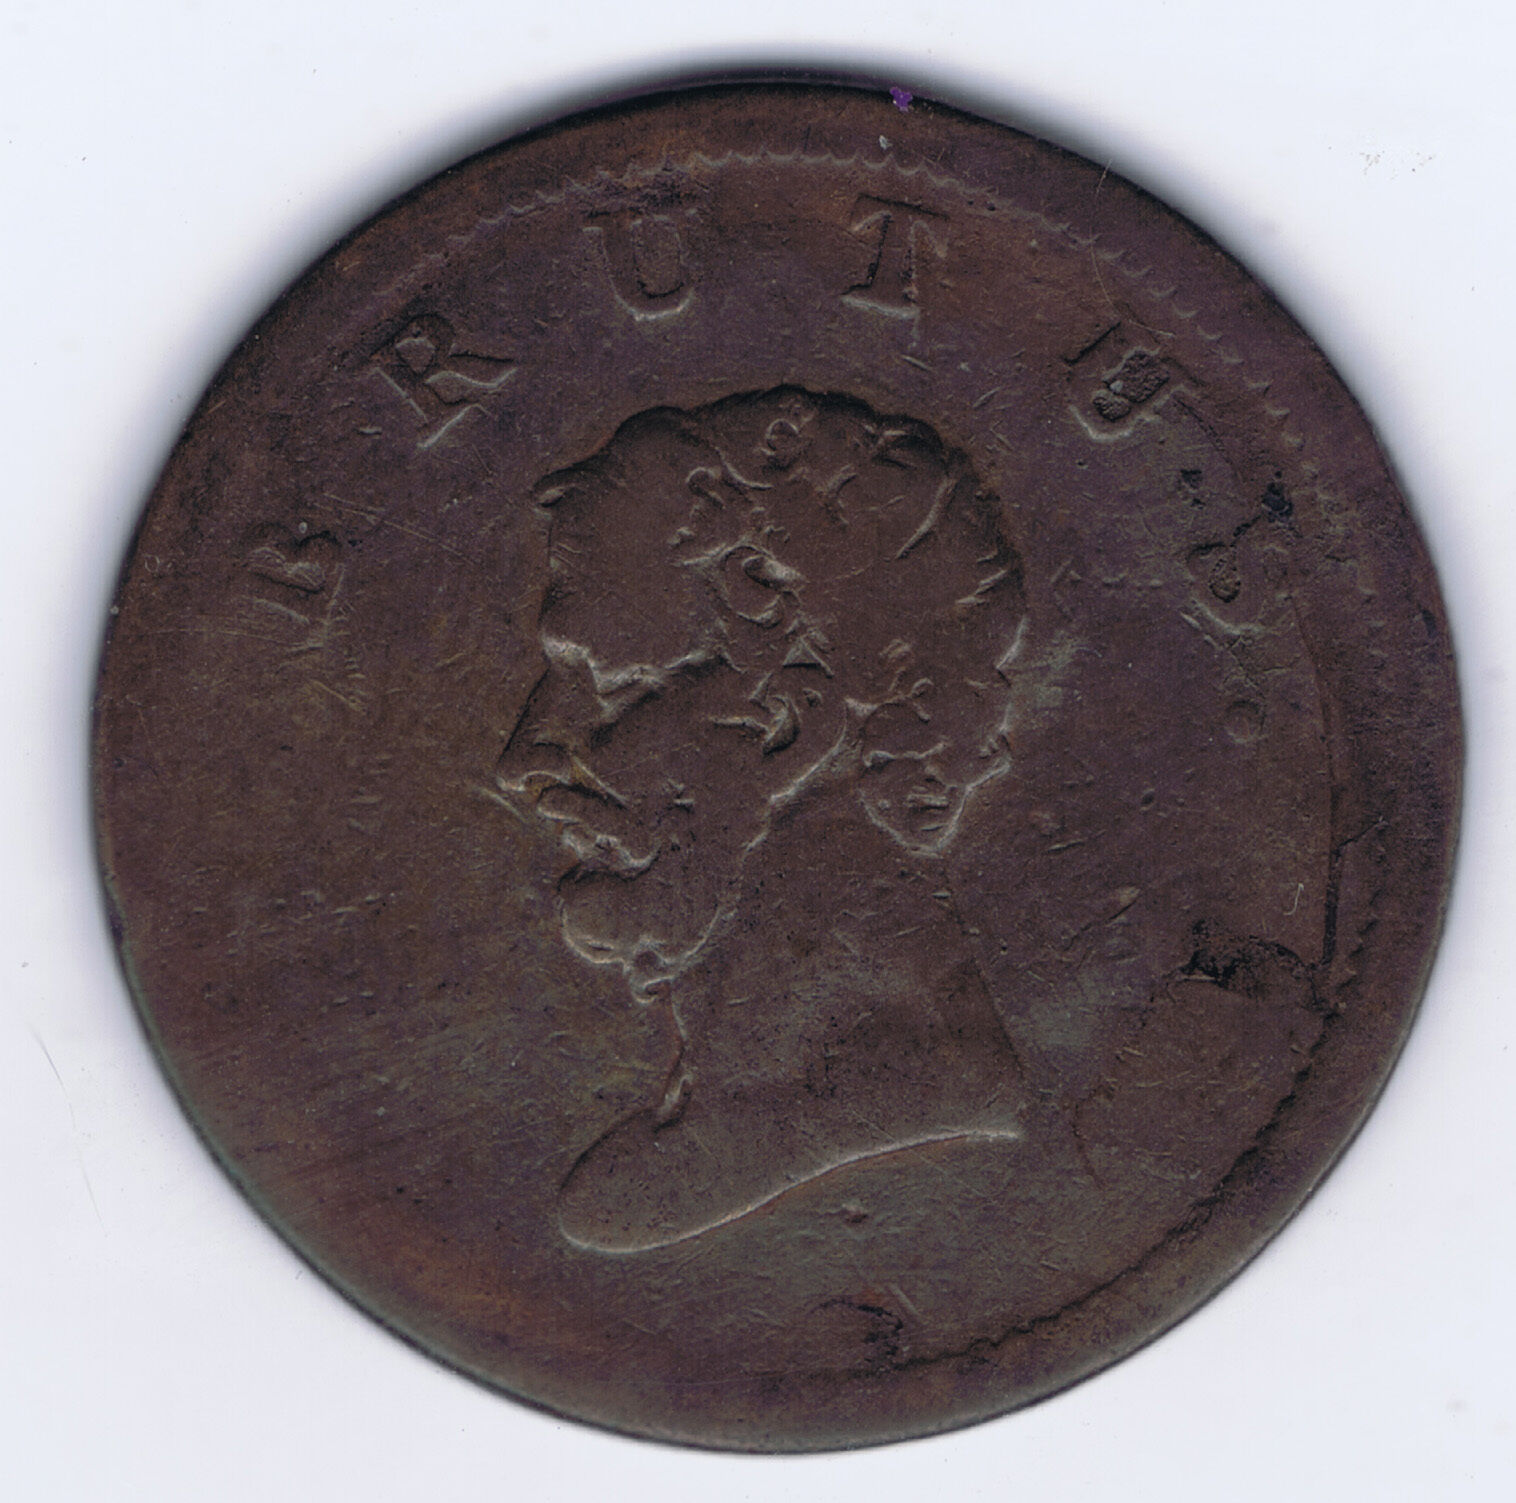 GREAT BRITAIN (NOT DATED) 1809-1870 HALF PENNY BRUTUS TOKEN by BRITISH COPPER CO